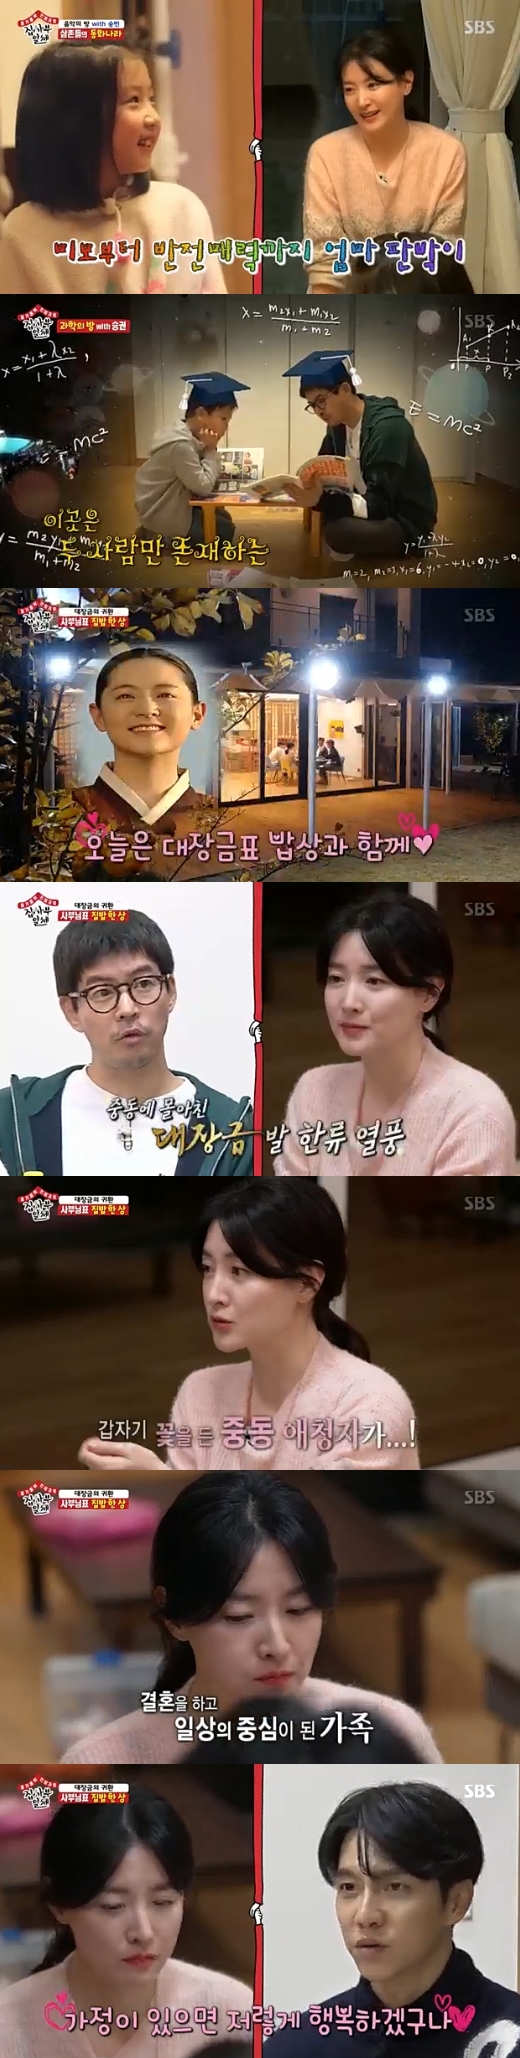 Lee Yeong-ae revealed her mother, not an actor, as well as conveying her thoughts on the weight of words.Actor Lee Yeong-ae appeared as master on SBS All The Butlers, which aired on the afternoon of the 1st, following last week.Lee Yeong-ae, twin I-DLE winner, Seung Bin, Lee Seung-gi, Lee Sang-yoon, Yook Sungjae and Yang Se-hyeong had a good time.Seung Bin laughed with an entertainment feeling, and the victory was amazed by his amazing scientific knowledge.Lee Yeong-ae and All The Butlers members who have a meal time.Lee Yeong-ae said, When I walk to Itaewon and walk with a groom, sometimes someone brings flowers.Middle Easters, he said of the explosive popularity of Dae Jang-geum in Middle East, where TV viewer ratings were close to 90%.The day was also revealed. Lee Yeong-ae said, I go to school in the morning, I follow a lot of kids.Im married late, especially in my case, so I know more about the importance of family, so Im going to be with I-DLE if I can, he said.Lee Seung-gi said, I thought I would be so happy if I had a family while I was looking at it. Lee Yeong-ae said, It seems to be a great strength.Because of the idea that Im on my side.When asked what he was doing at this time, Lee Yeong-ae said, Its time to wash and put them to bed. And let me see what Im doing.Most of our daily lives do, he said.The most pleasant compliment I have heard recently was that I-DLE said, My mothers doing is the best. He expressed his affection for I-DLE, saying, The praise for I-DLE is the best.(I-DLE) have him practice.I love you whenever I can, thank you, always hug me, make me express delicious if I want to taste it, and practice it so that I can come out right away. I had time to practice praise. Yang Se-hyeong called Park Na-rae, Lee Seung-gi was Suzie, and Lee Yeong-ae called Jang Seo-hee and conveyed his sincerity.Lee Yeong-ae said, I love you when I can, and I think it would be a habit to continue practicing as part of the practice.Yook Sungjae, who heard this, said, Even if you write on SNS, it may be very impressed and powerful with a small word. Yang Se-hyeong said, Sometimes it is the opposite.Lee Seung-gi, who was listening to this, said, The horse seems to be very scary and powerful.Lee Yeong-ae said, There are many friends who made their debut early, and such friends are still weak enough to judge themselves in many ways.I think it is very important because I can save and kill people by saying that I am overwhelmed by such words, worry about myself, and have a lot of bad things. Lee Seung-gi agreed, saying, It seems that a good word, a word of praise, is a fortress that is really desperate.